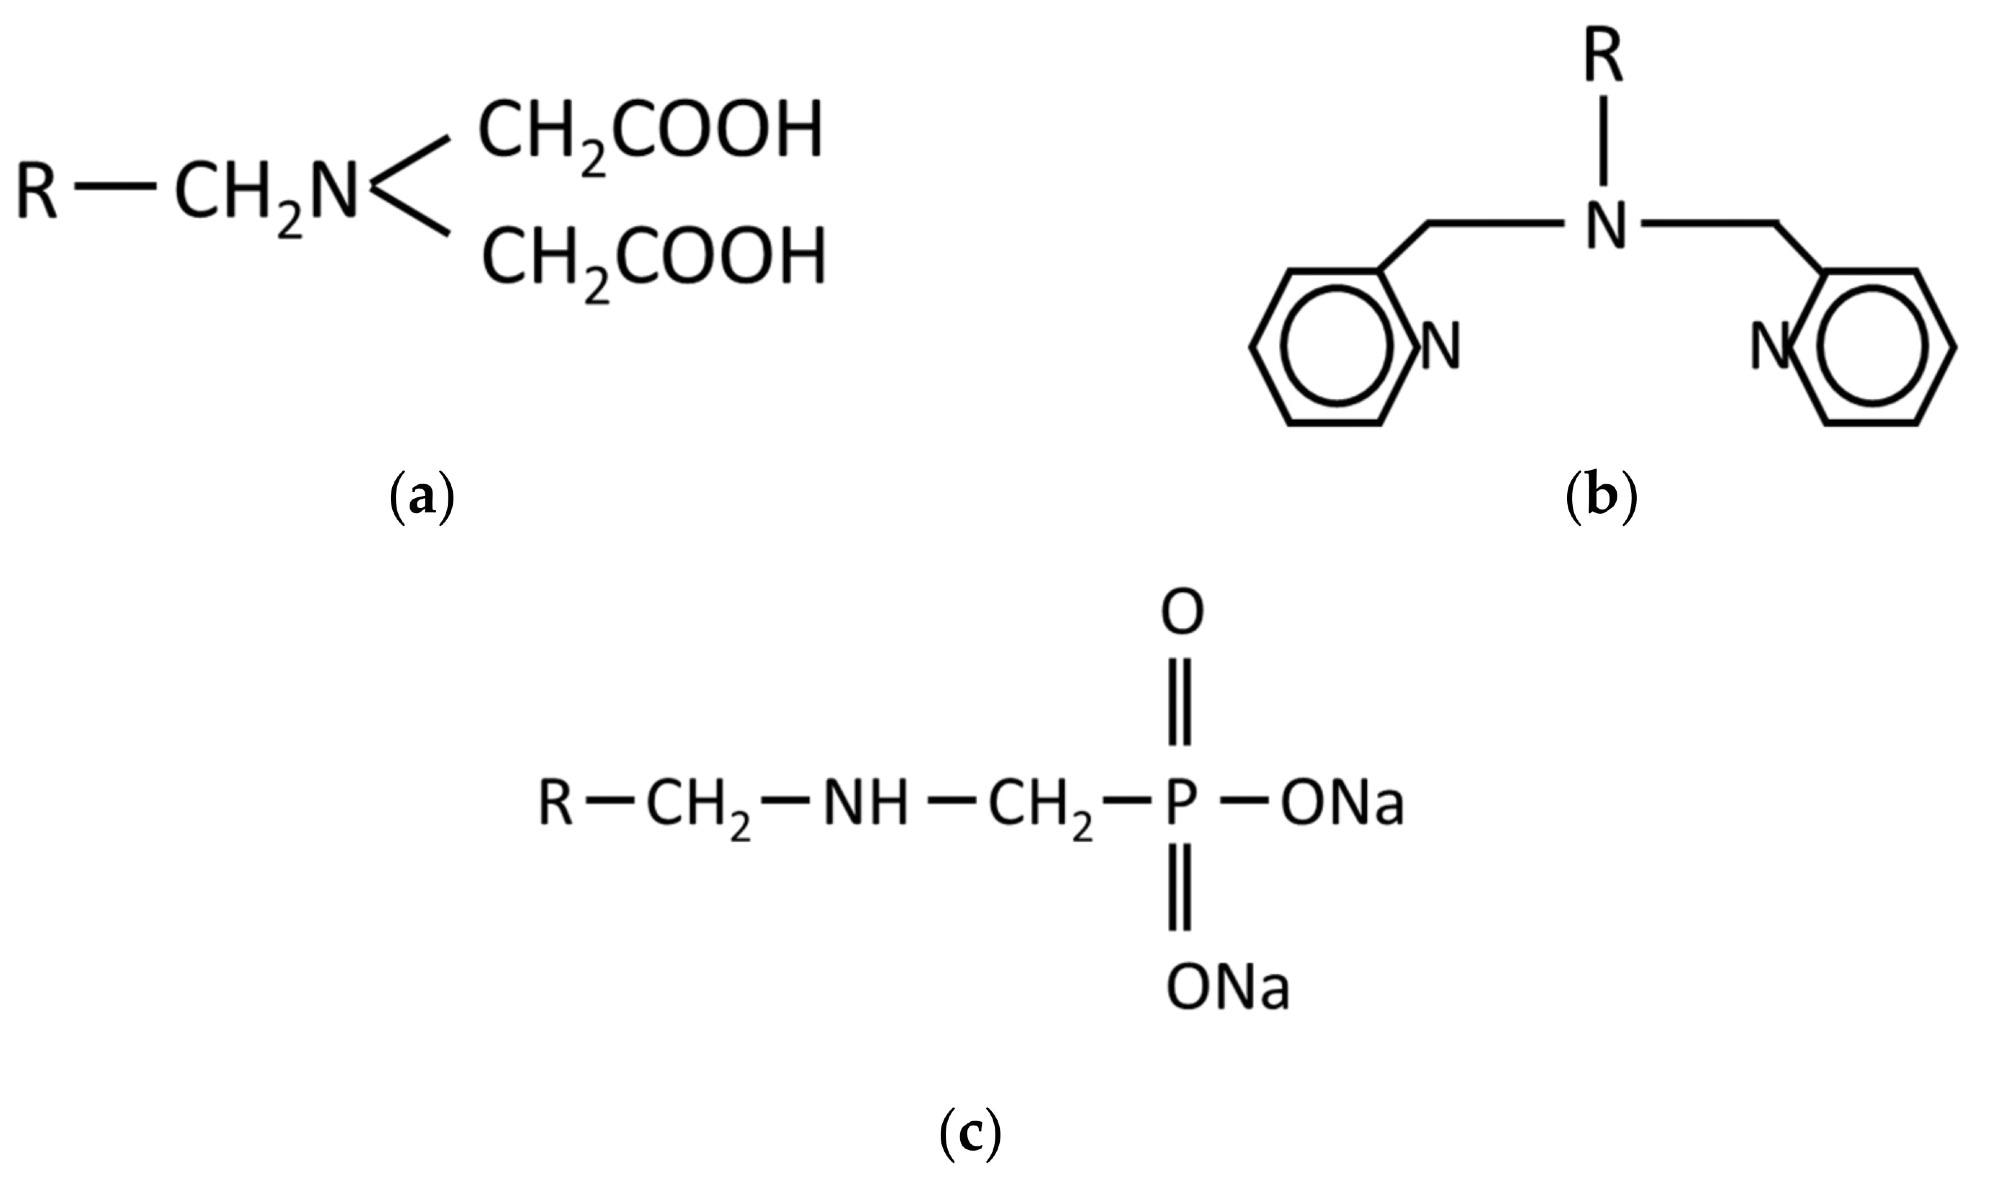 Functional groups of chelating resins reported in the literature for Co recovery: (a) iminodiacetate; (b) bis-pycolilamine; and (c) aminophosphonate acid [37,87,96].